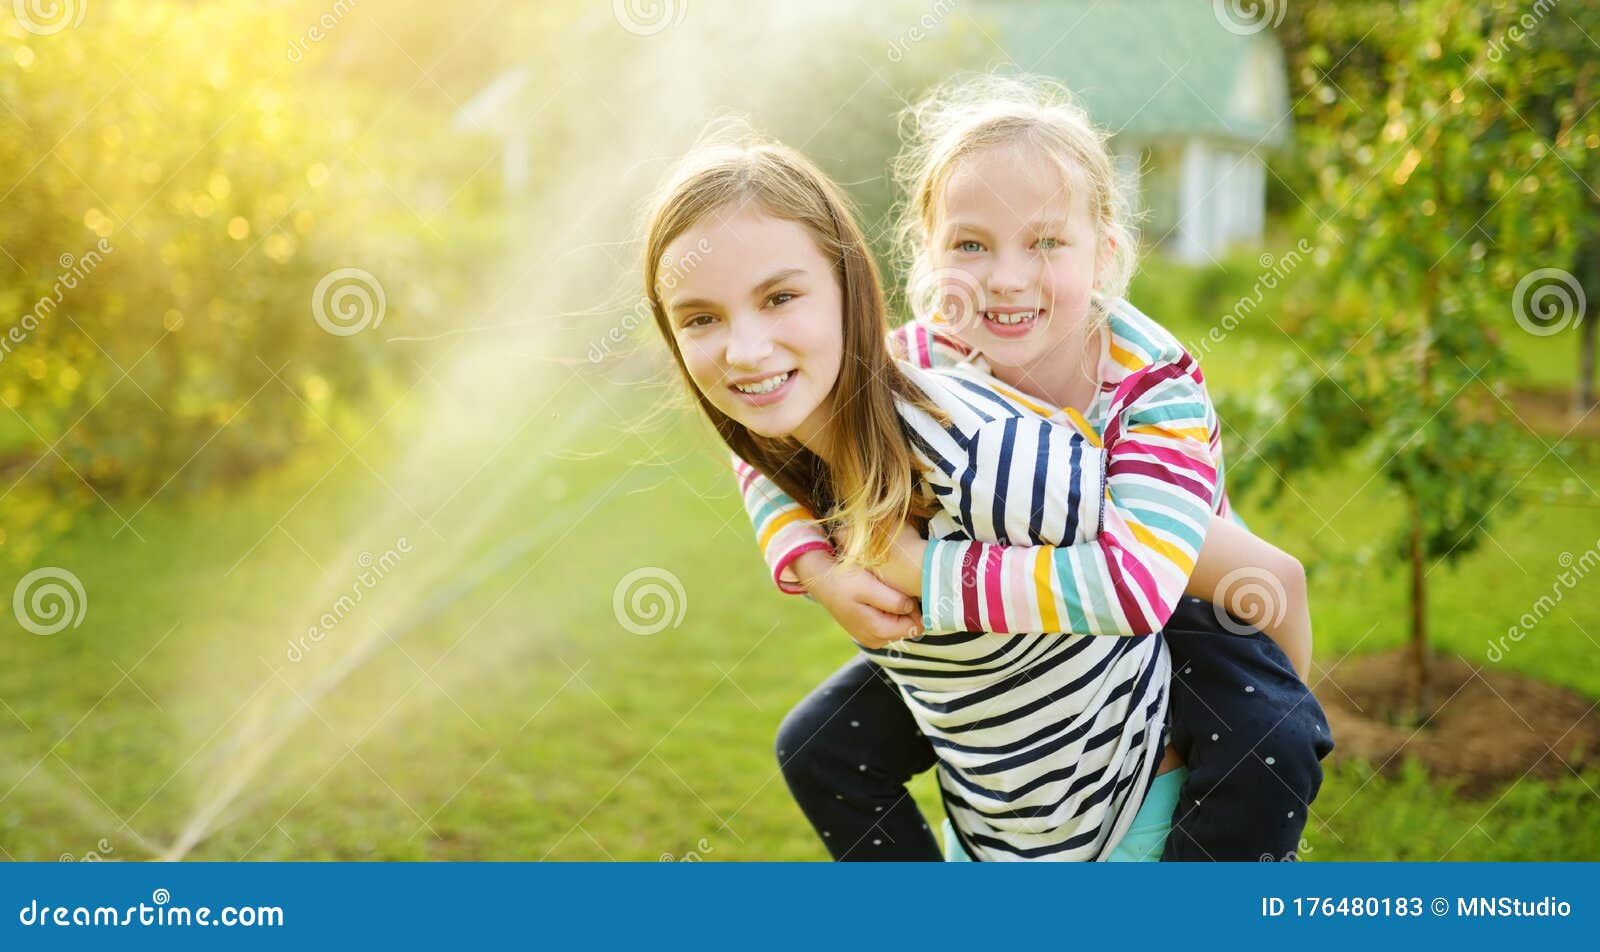 Adorable Little Girl Playing With A Sprinkler In A 